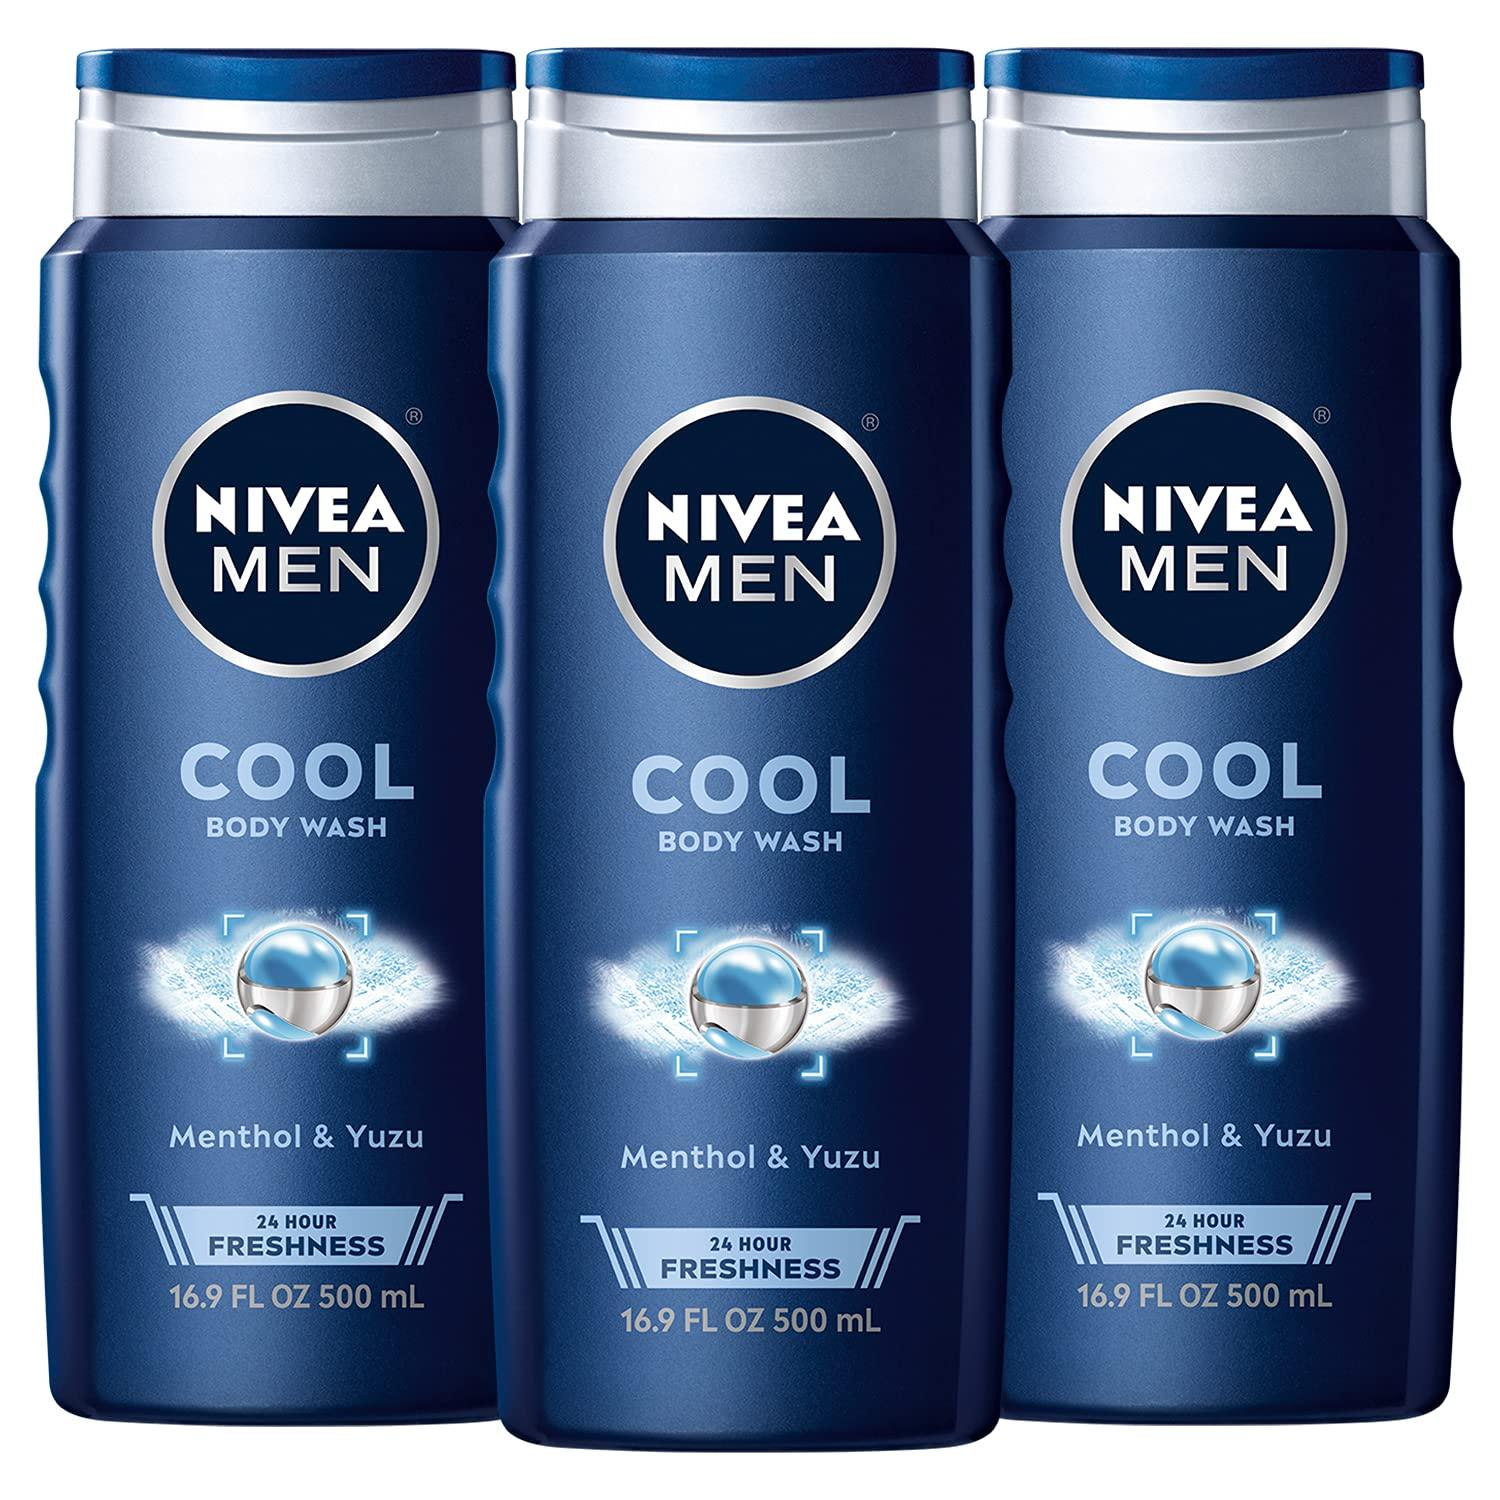 3 Nivea Men 3-in1 Cool Body Wash for $7.39 Shipped